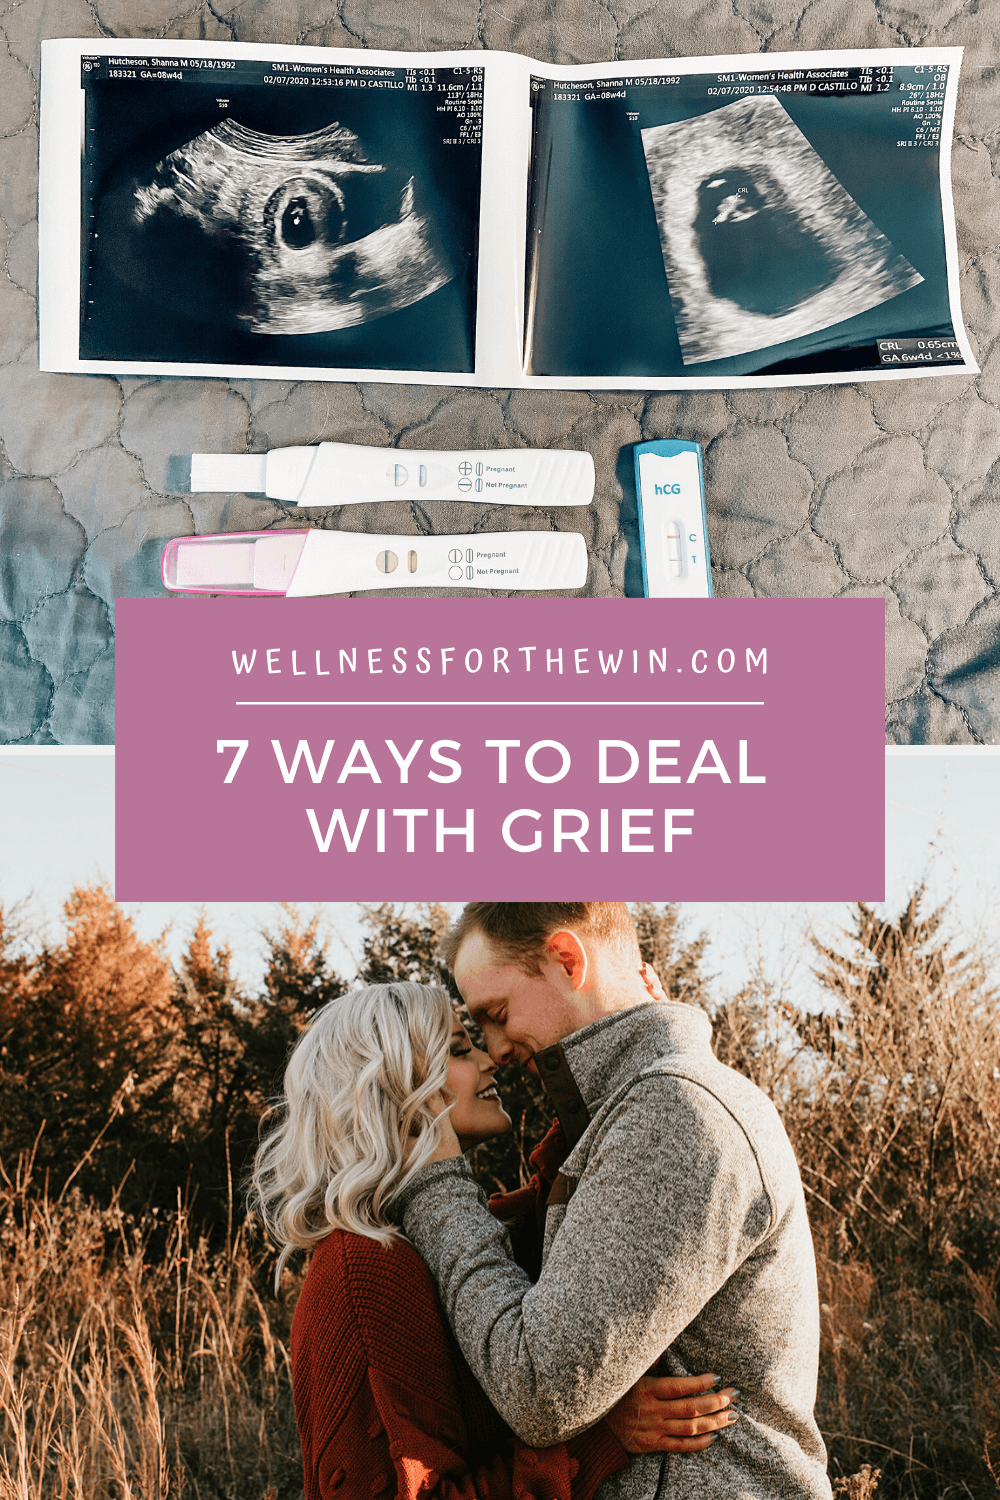 7 Ways to Deal With Grief